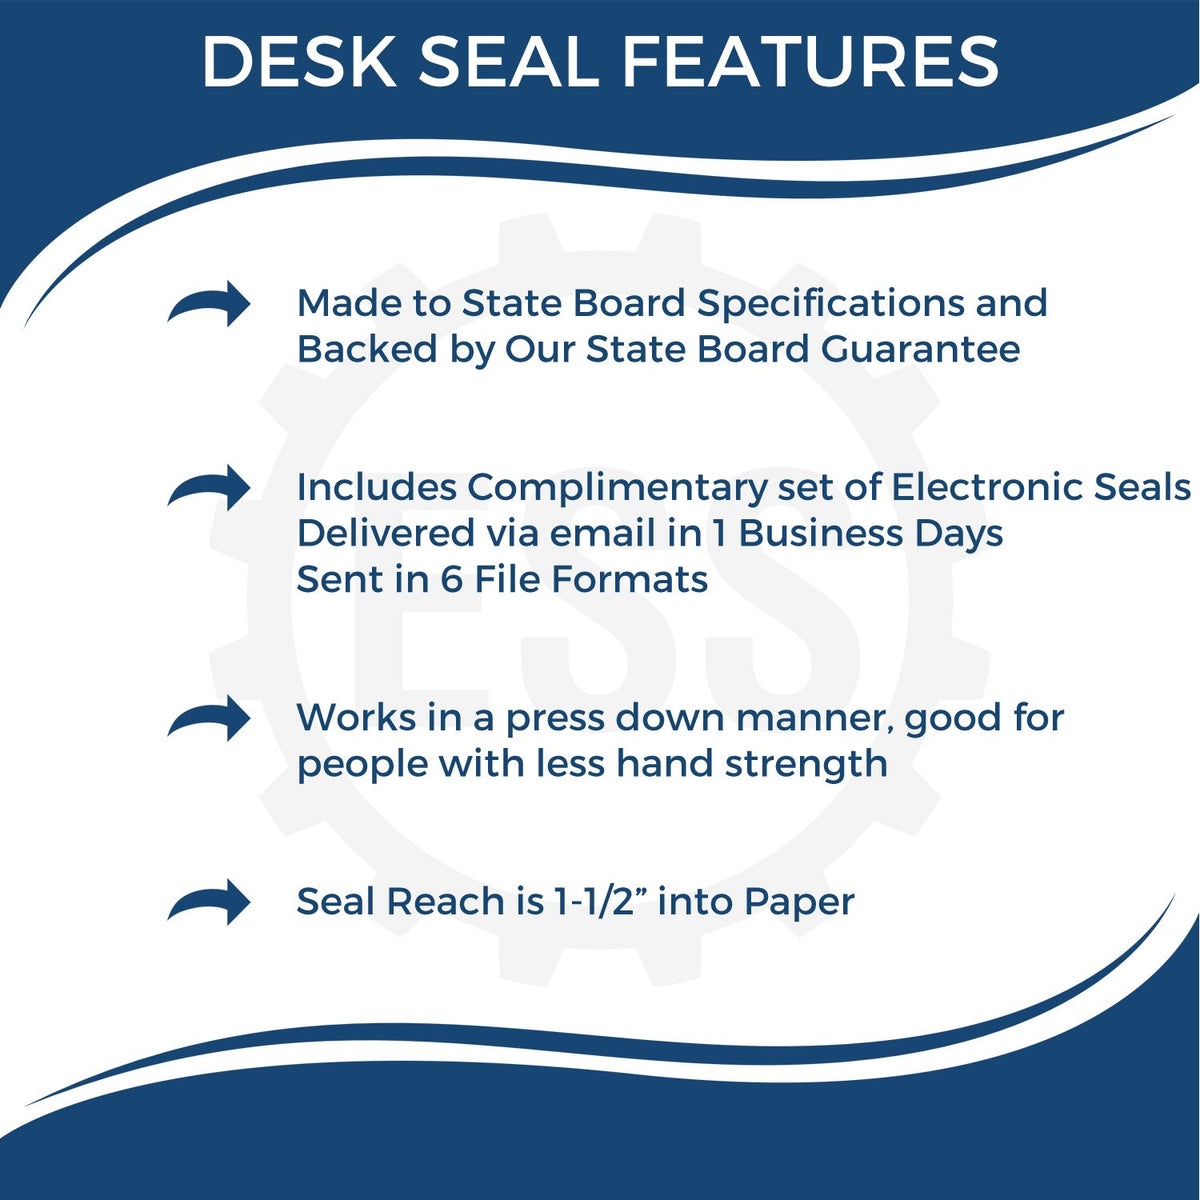 A picture of an infographic highlighting the selling points for the New Mexico Desk Architect Embossing Seal